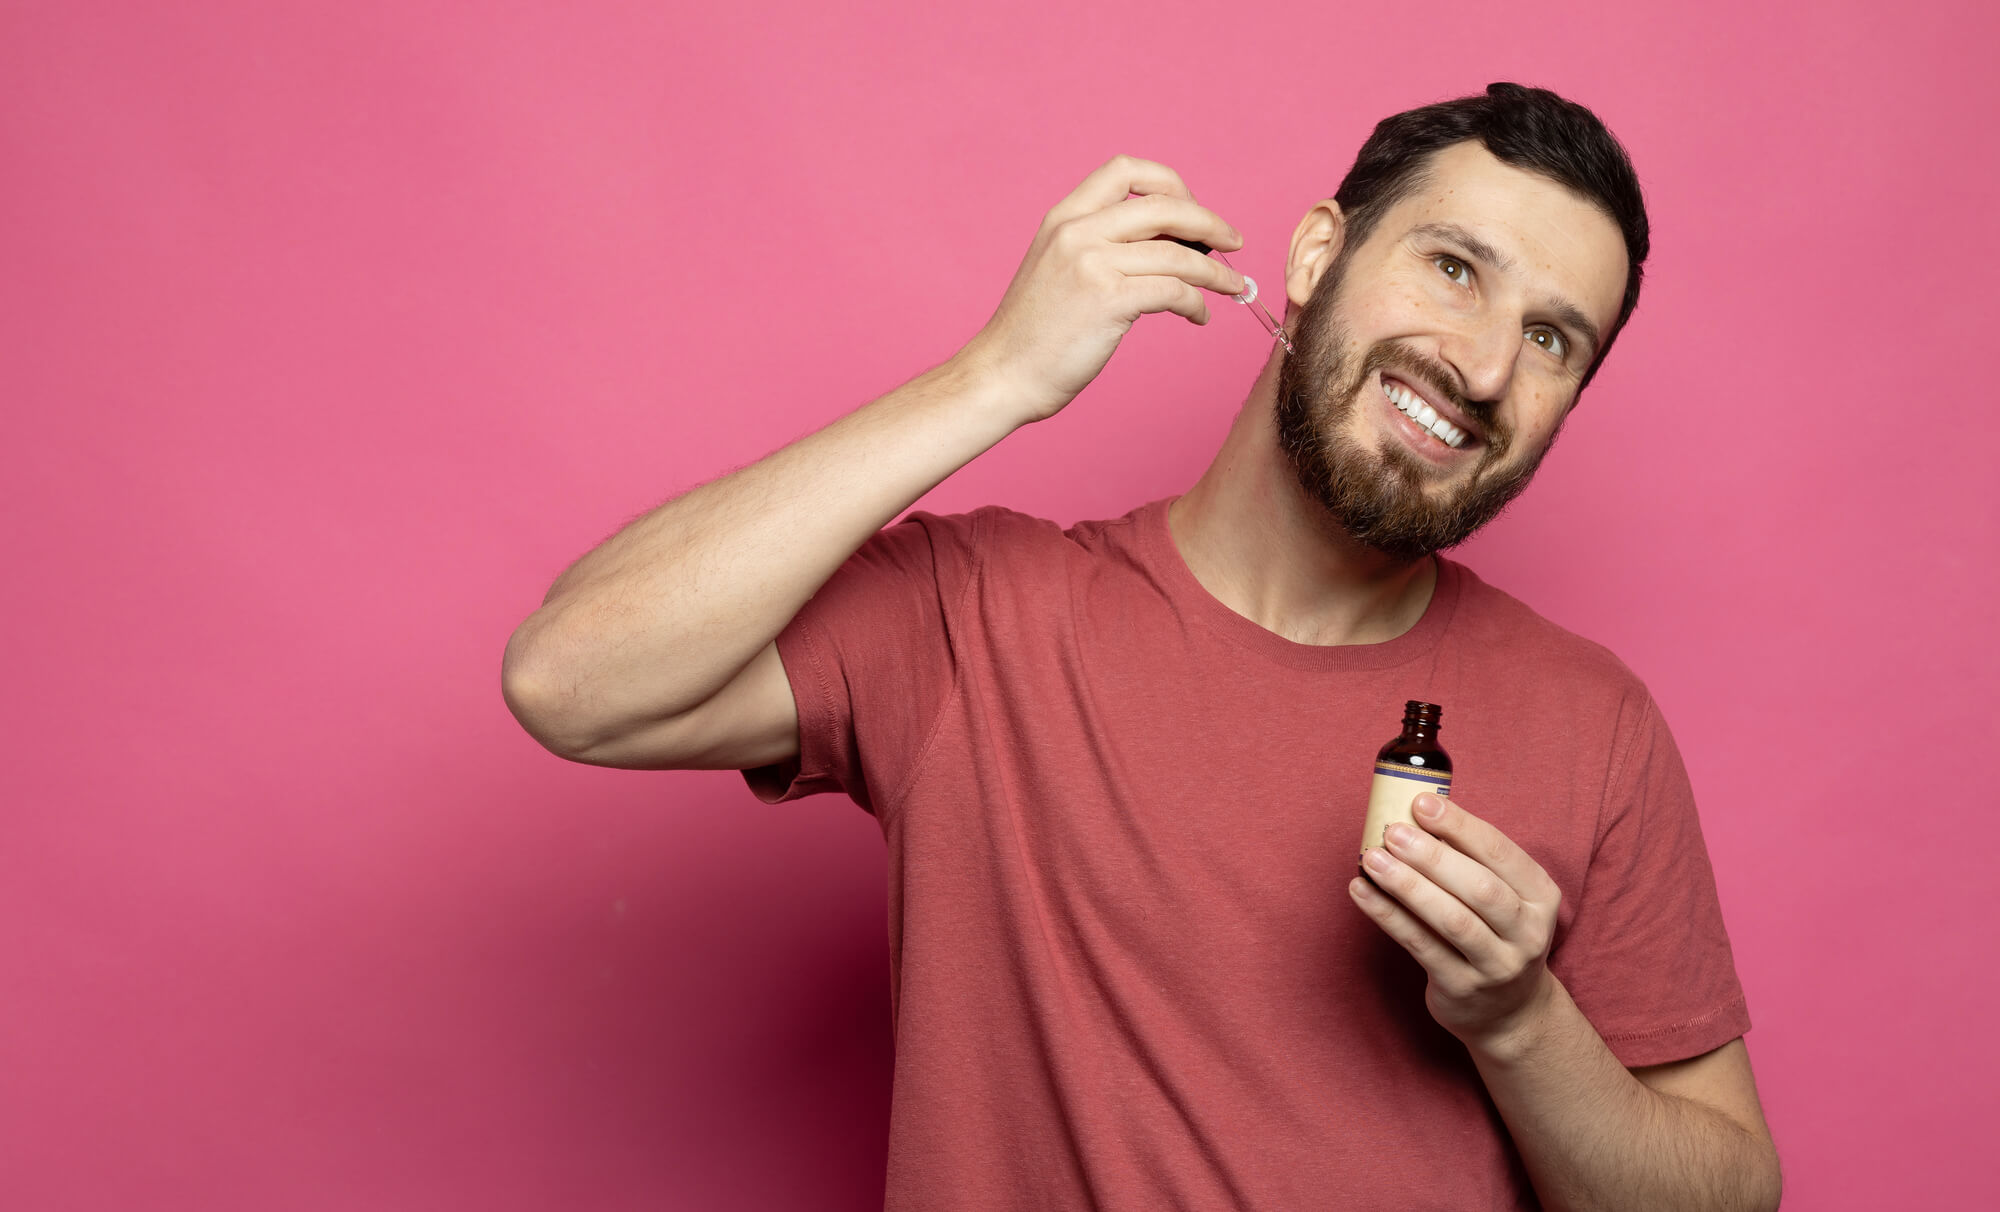 Bearded man holding pippete with beard oil